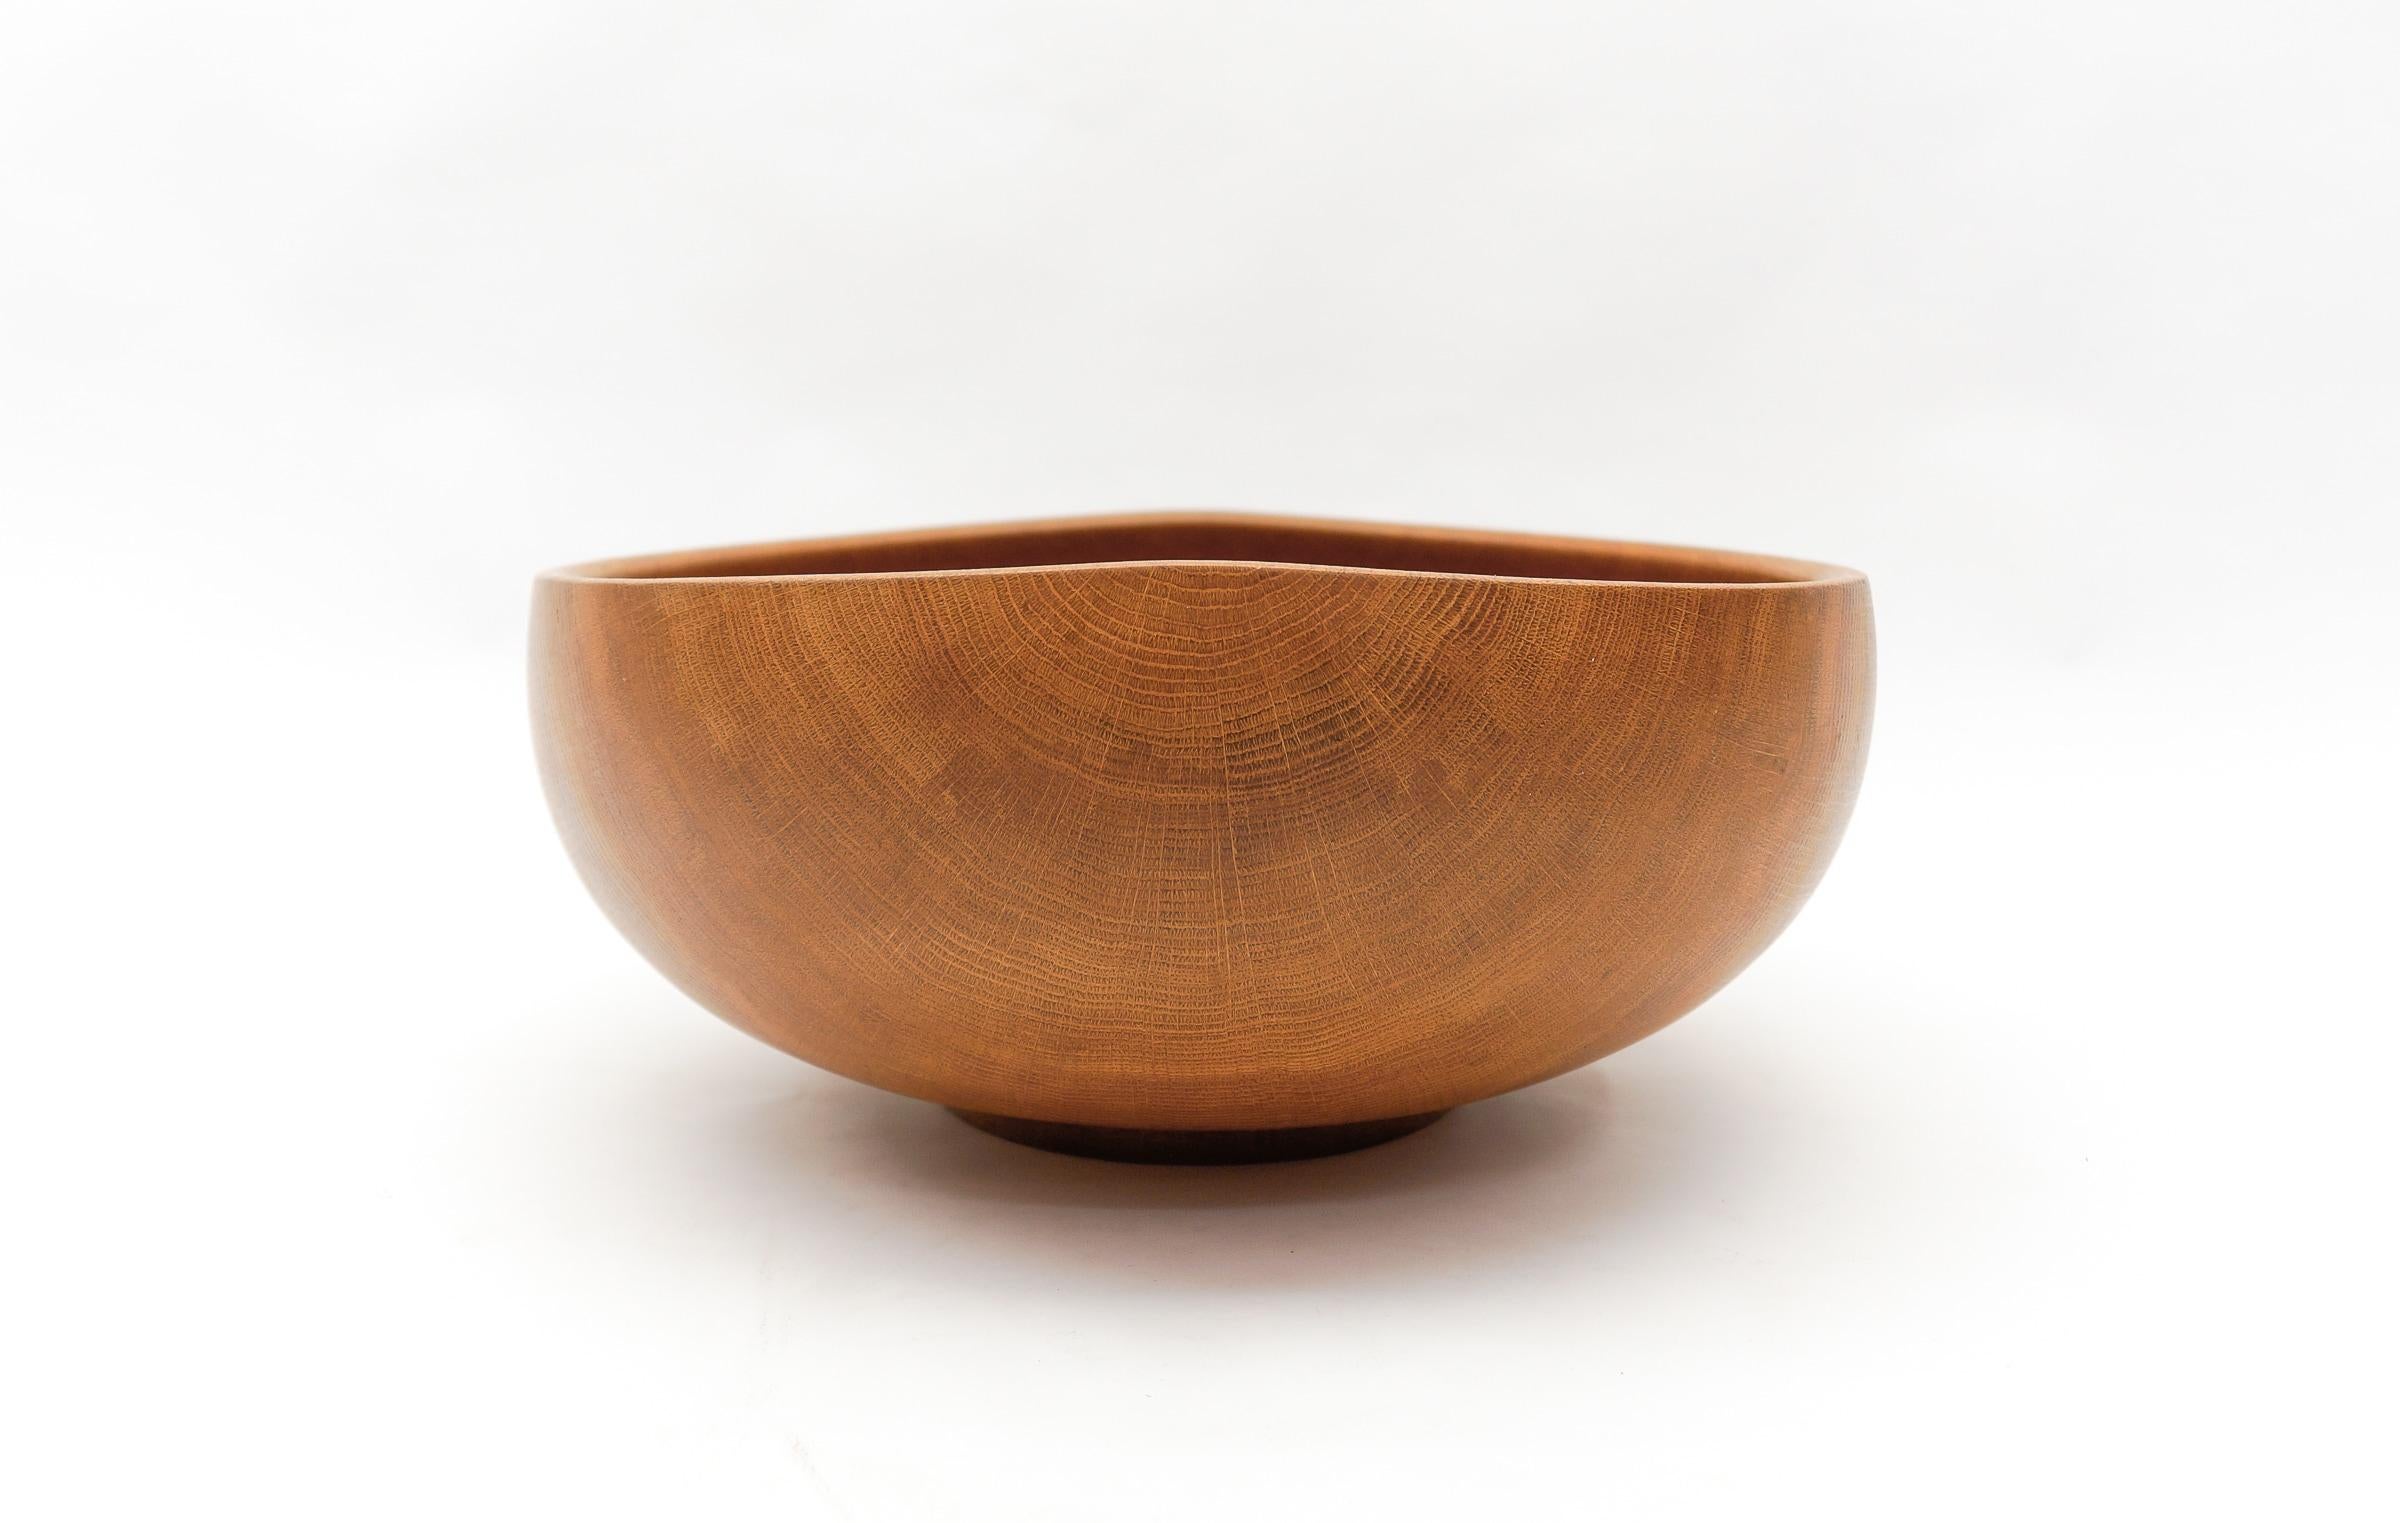 Awesome Huge Mid-Century Modern Oak Bowl by K. Weichselbaum, 1999 Germany For Sale 2